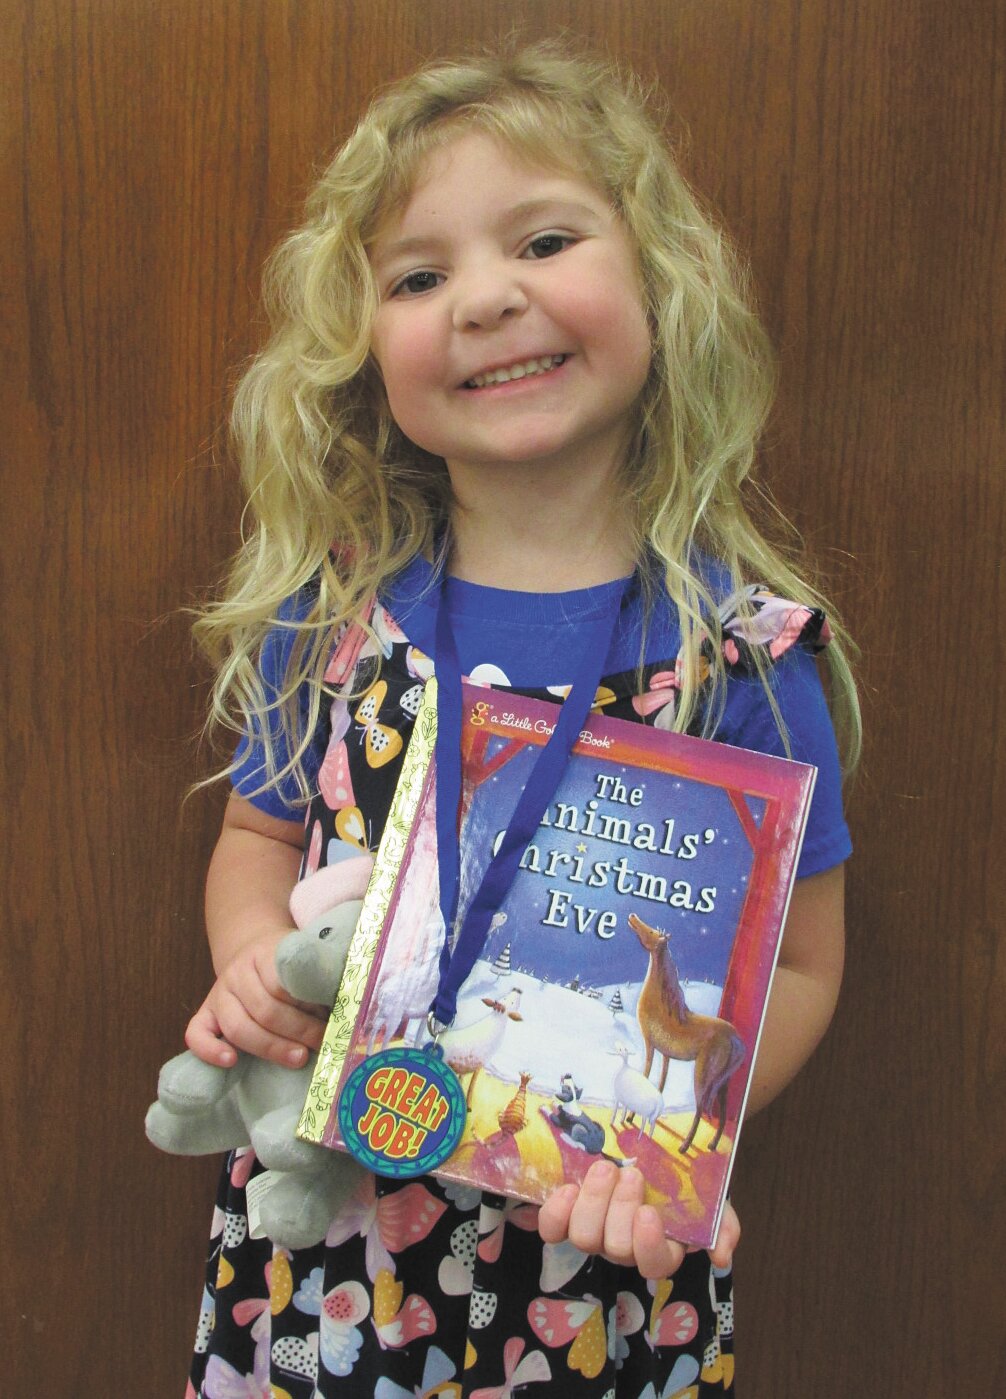 Lily Vi Yates, age 4, has completed the Crawfordsville District Public Library program, 1,000 Books Before Kindergarten. She is the daughter of Nikki Yates. Lily Vi's favorite book is "You Get What You Get" by Julie Gassman. Mom said, "Thank you to the library for encouraging reading and goal completion. Lily Vi has become so goal oriented wanting to now finish 5,000 books. When asked why she loves reading she says "the pictures are the best!"